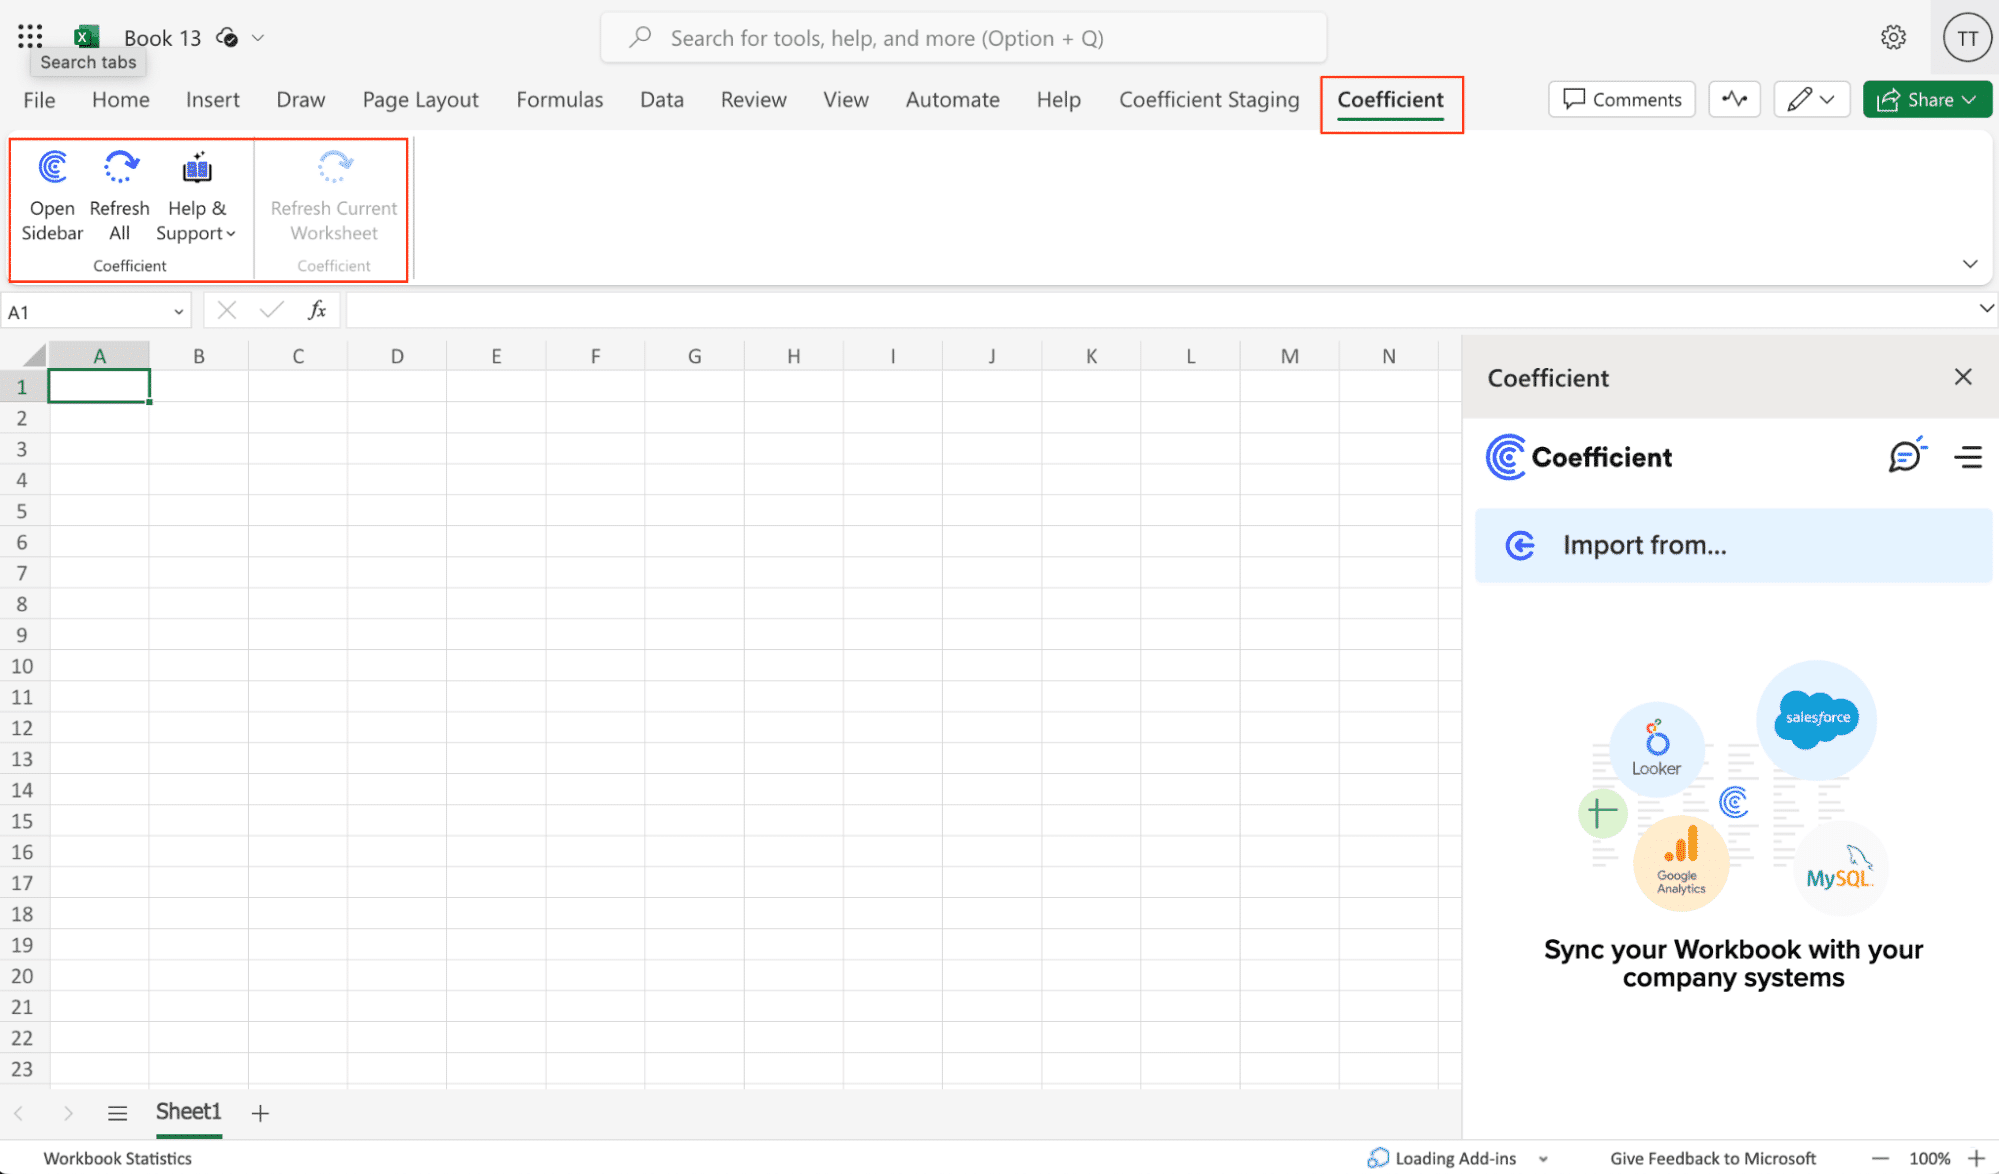 Find Coefficient Add-in from Microsoft Office Store
